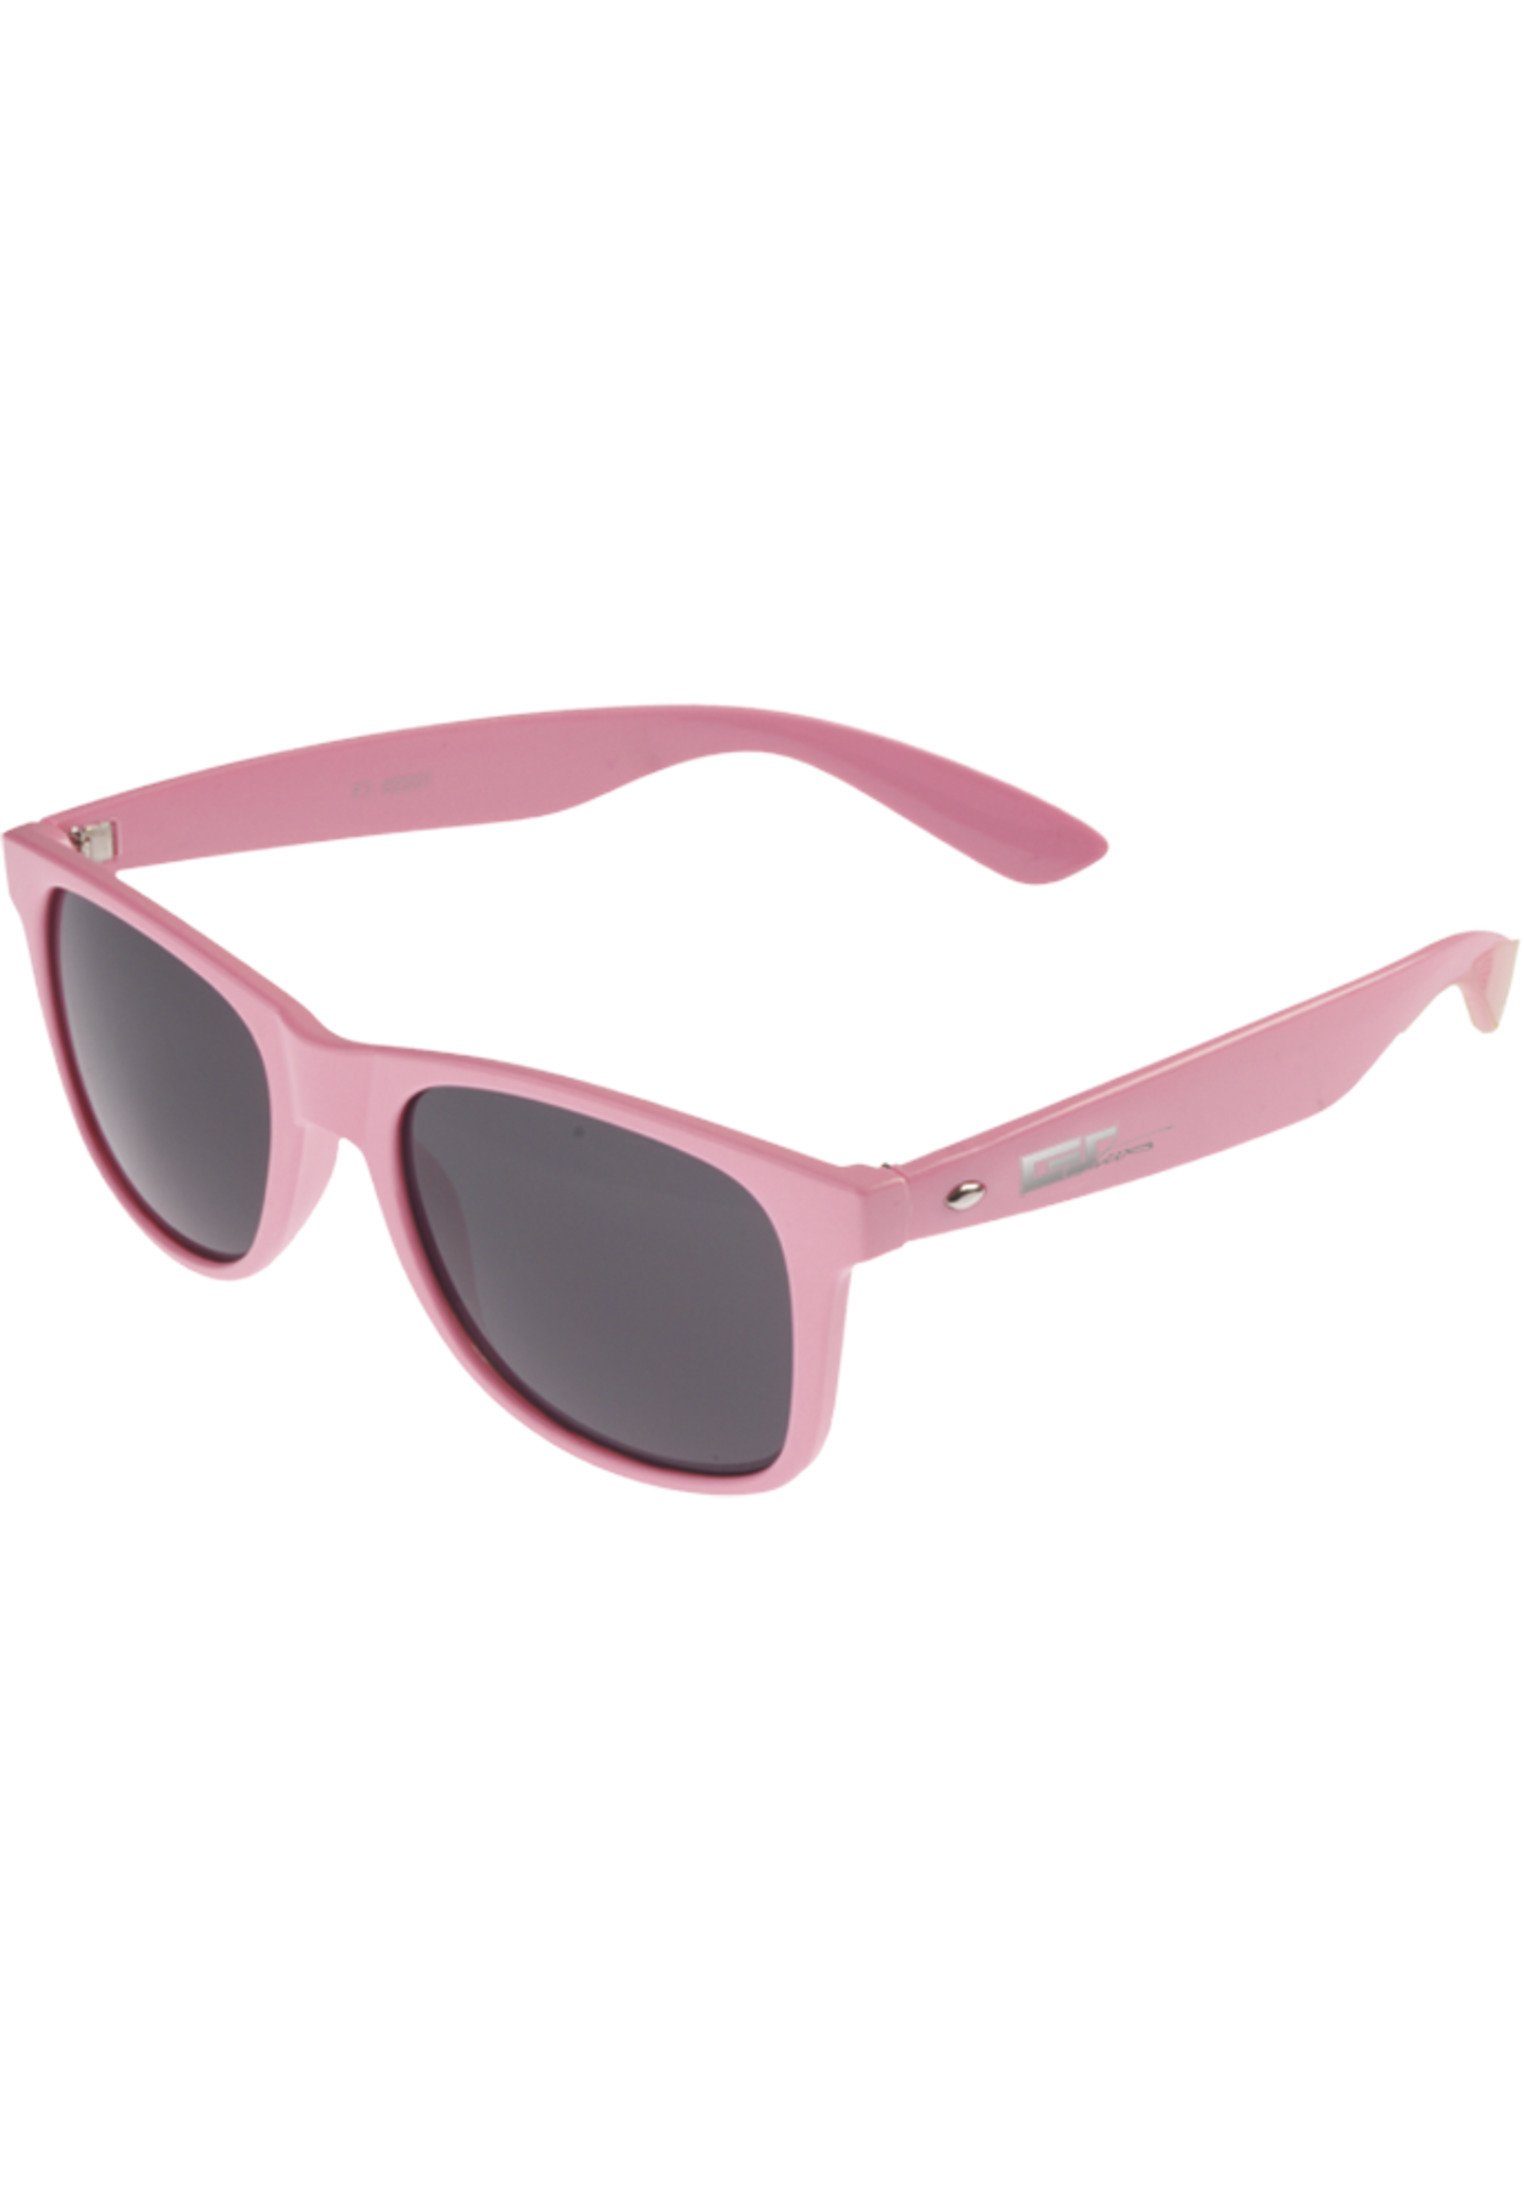 Shades MSTRDS Groove Sonnenbrille Accessoires GStwo neonpink